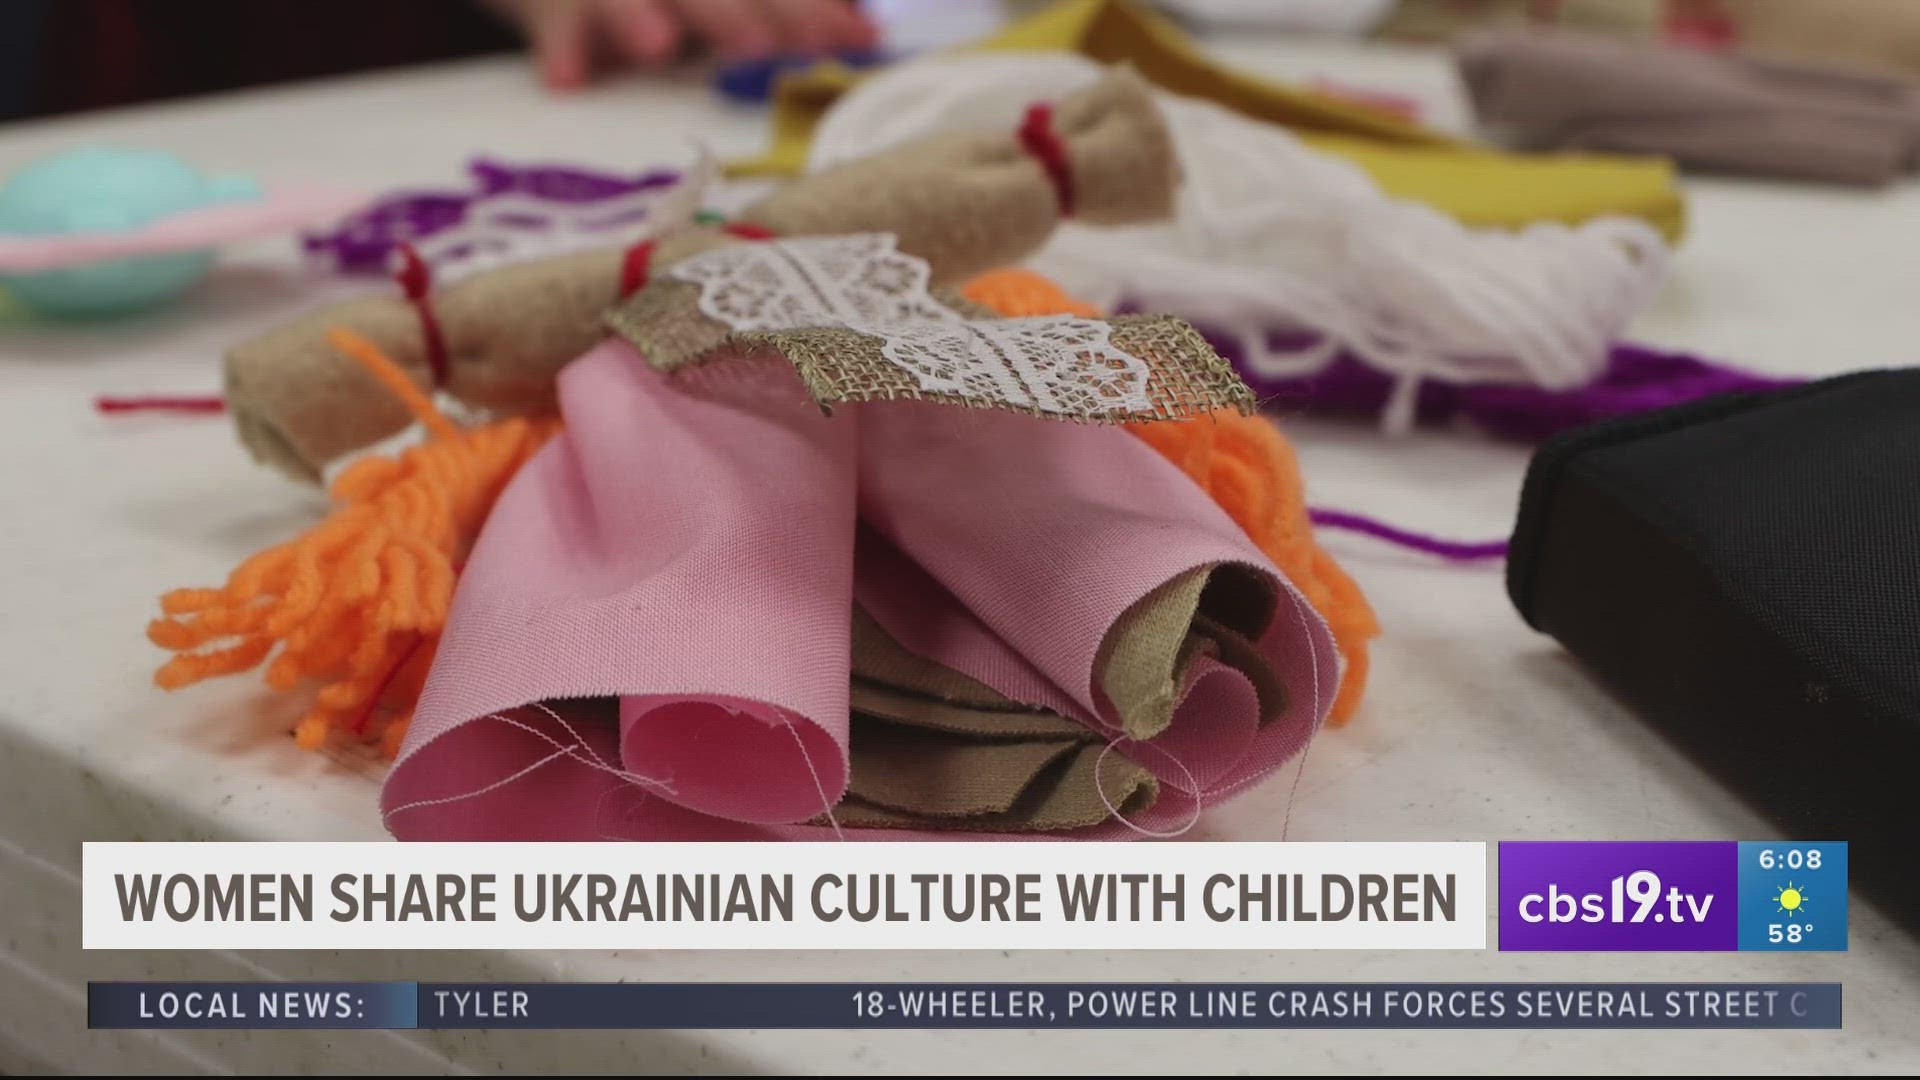 Two Ukrainian women are teaching children how to make traditional dolls, and celebrate the meaning behind them.